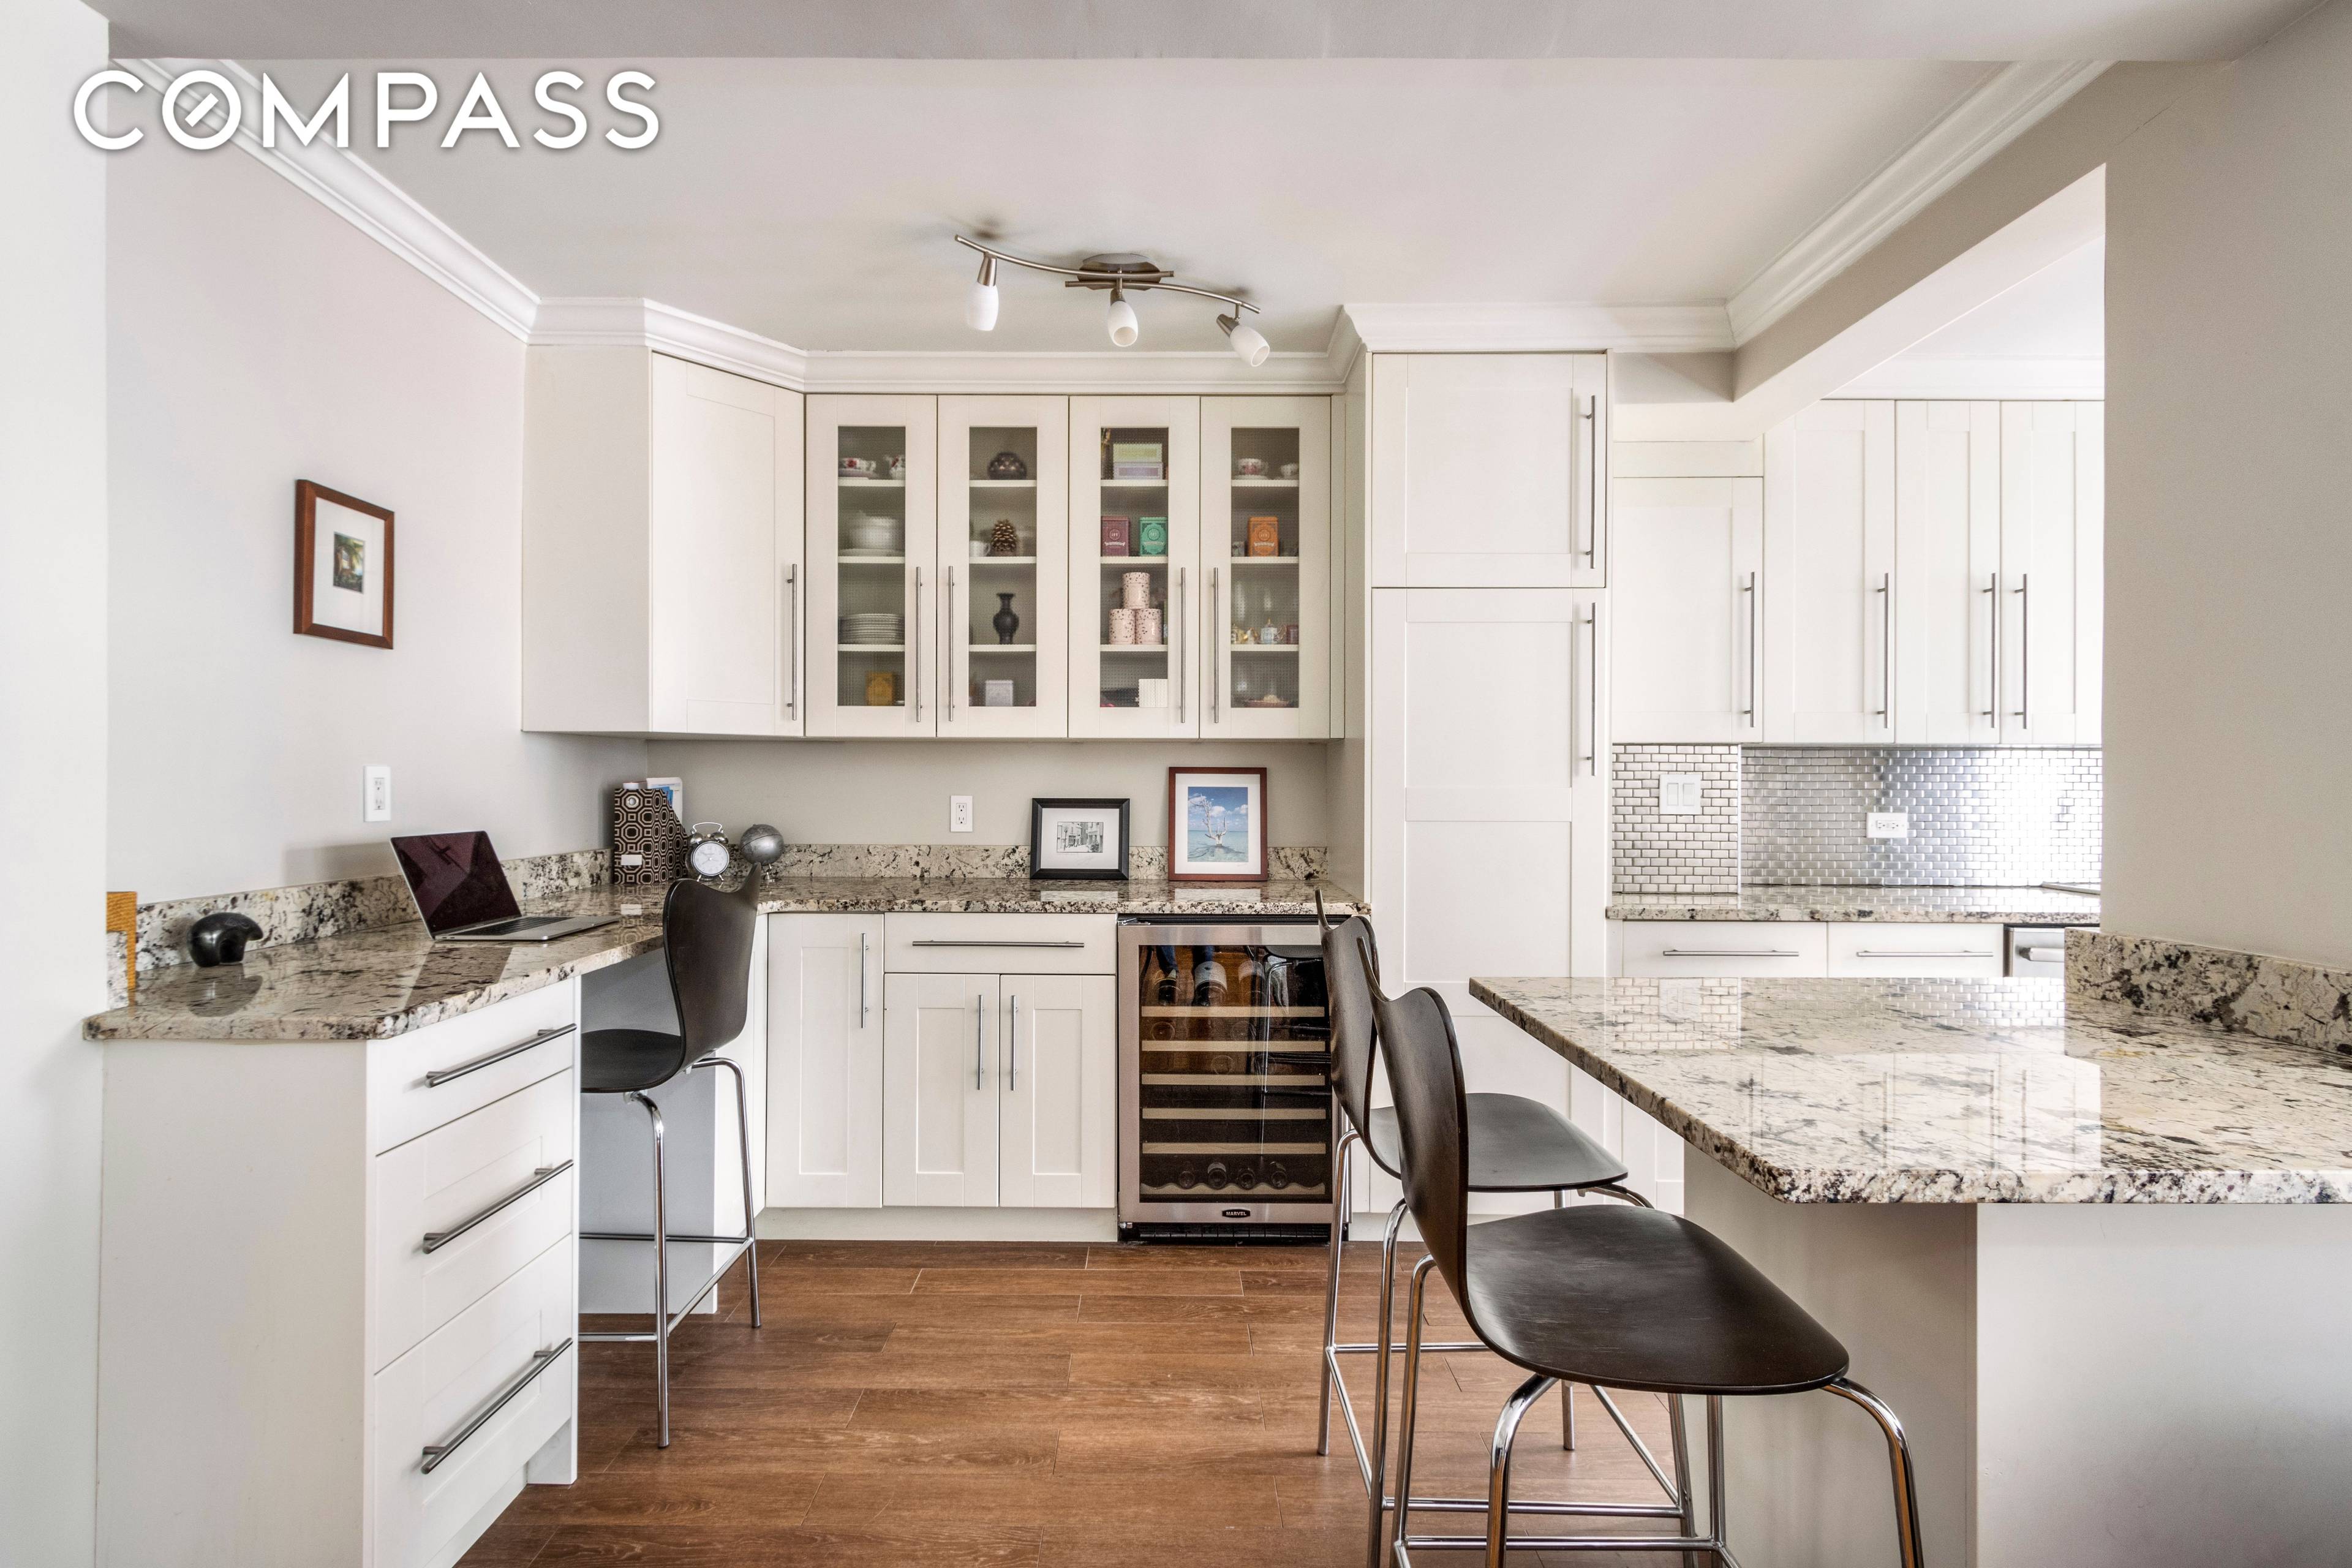 Welcome to 54 West 16th Street, 3B a spacious, sunny, and inviting corner two bedroom, two bath home perfectly located at the crossroads of Flatiron, Chelsea and Greenwich Village.